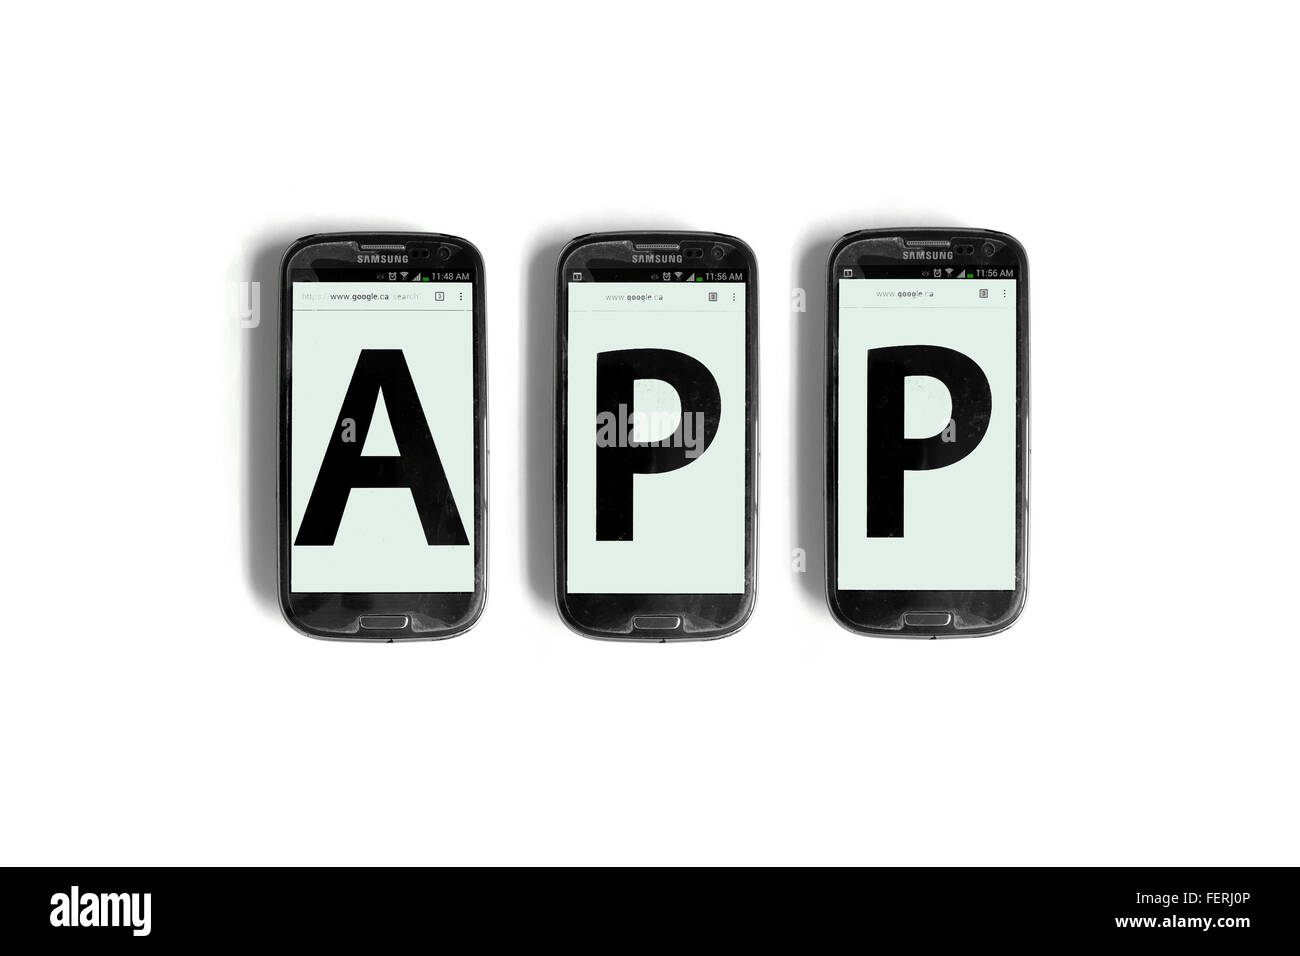 App on the screens of smartphones photographed against a white background. Stock Photo